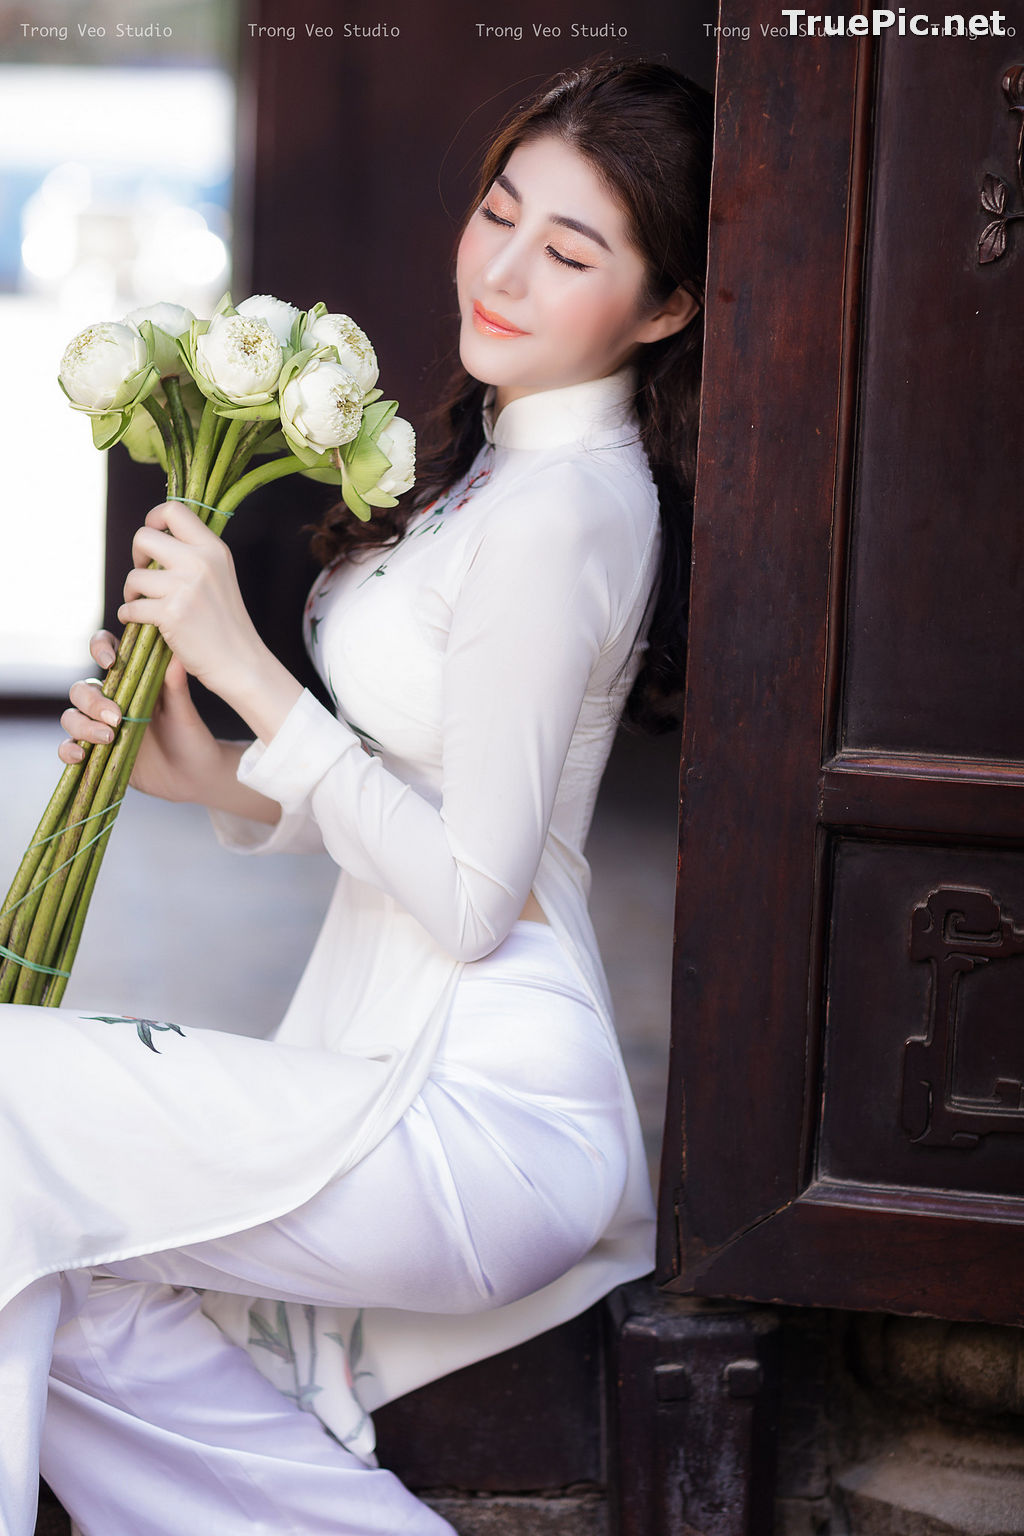 Image The Beauty of Vietnamese Girls with Traditional Dress (Ao Dai) #5 - TruePic.net - Picture-42